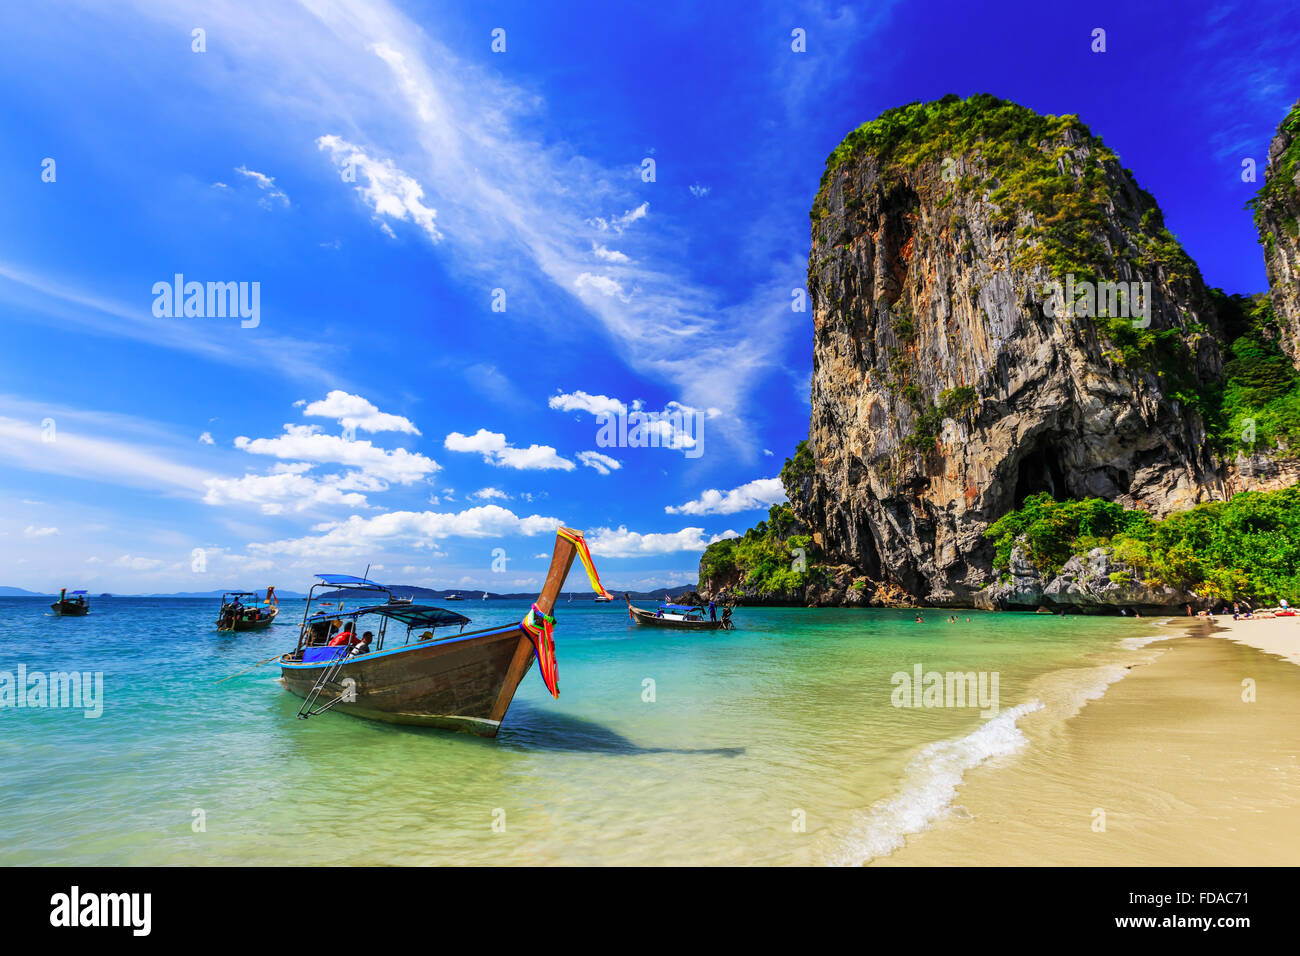 Thailand, Krabi. Long tail boat on tropical beach with limestone rock. Stock Photo